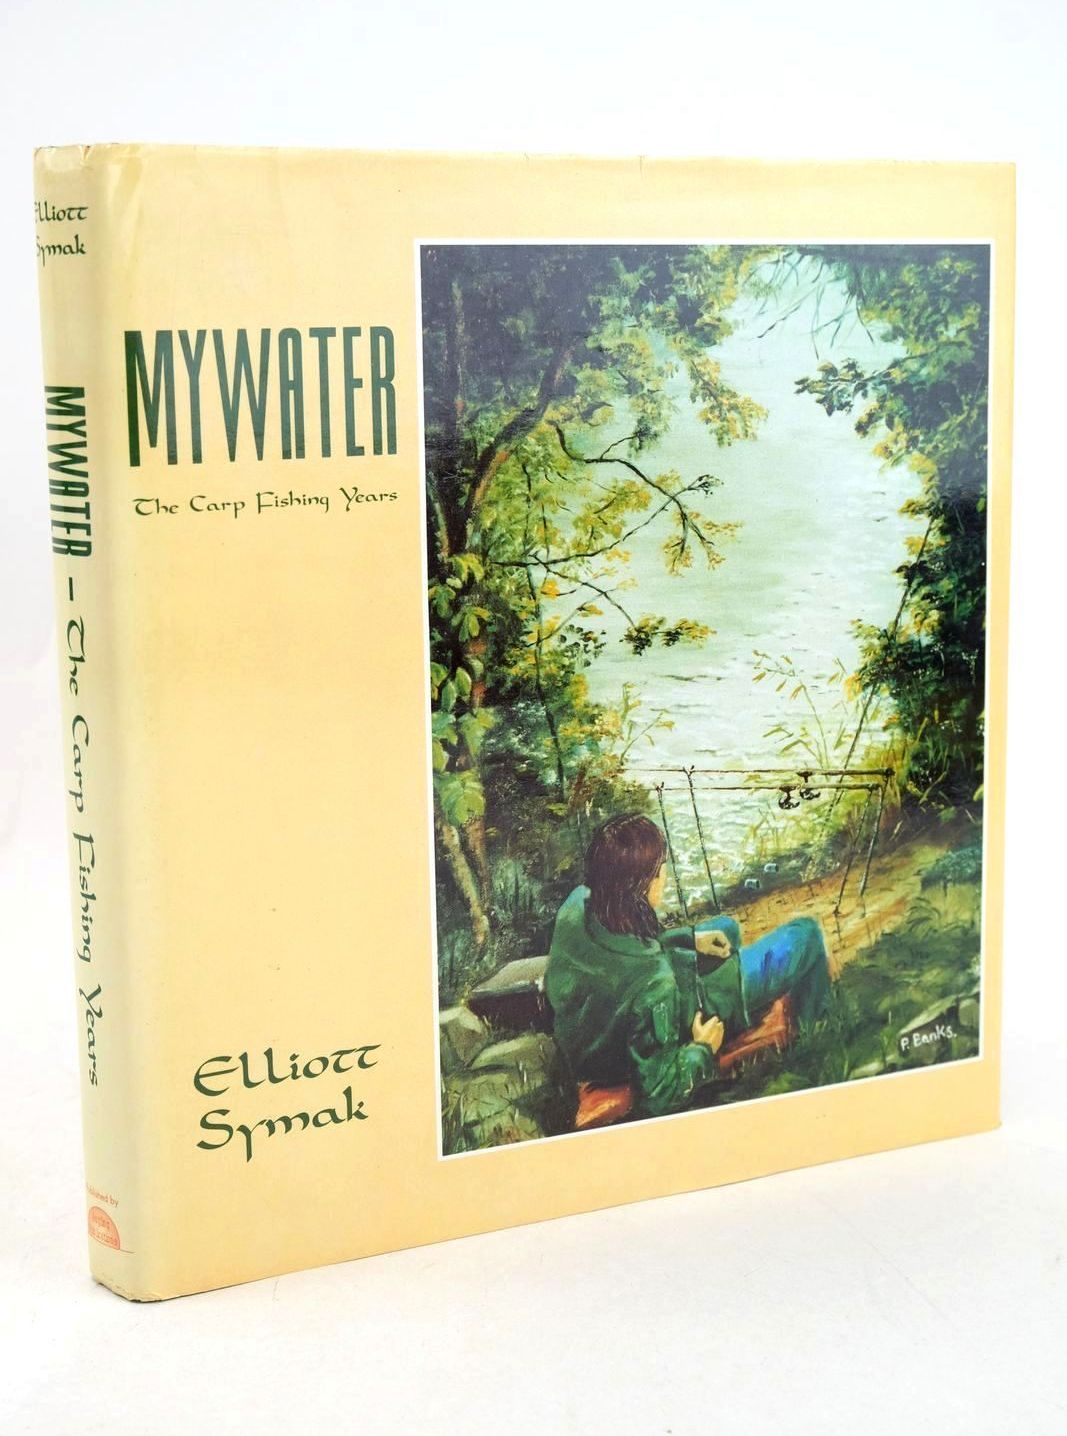 Photo of MYWATER - THE CARP FISHING YEARS written by Symak, Elliott illustrated by Banks, P. published by Angling Publications (STOCK CODE: 1327507)  for sale by Stella & Rose's Books